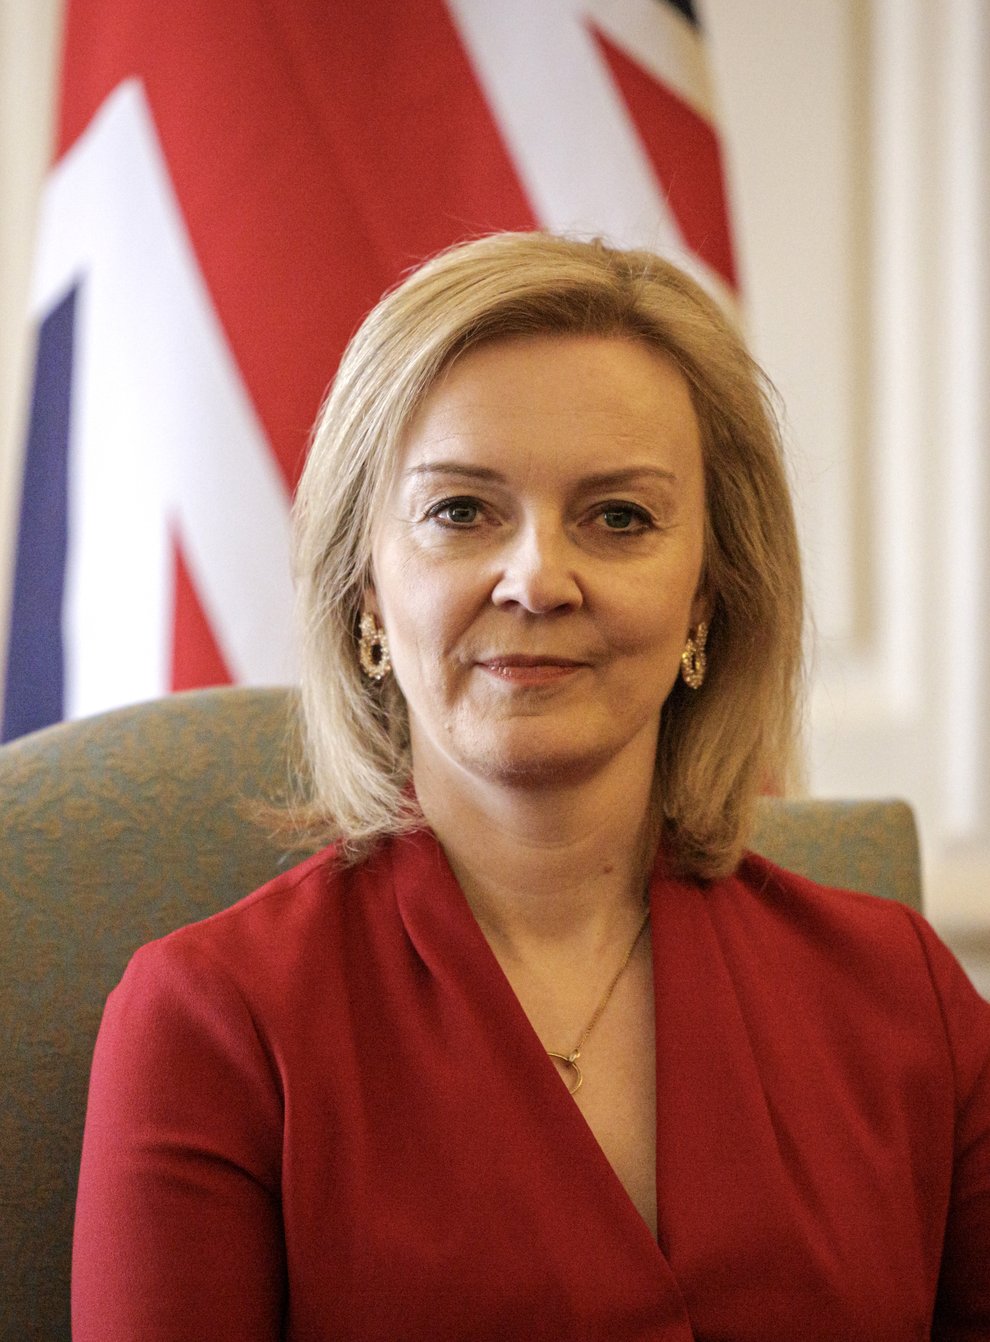 Foreign Secretary Liz Truss said Russian banks would no longer be able to access UK financial systems. (Rob Pinney / PA)